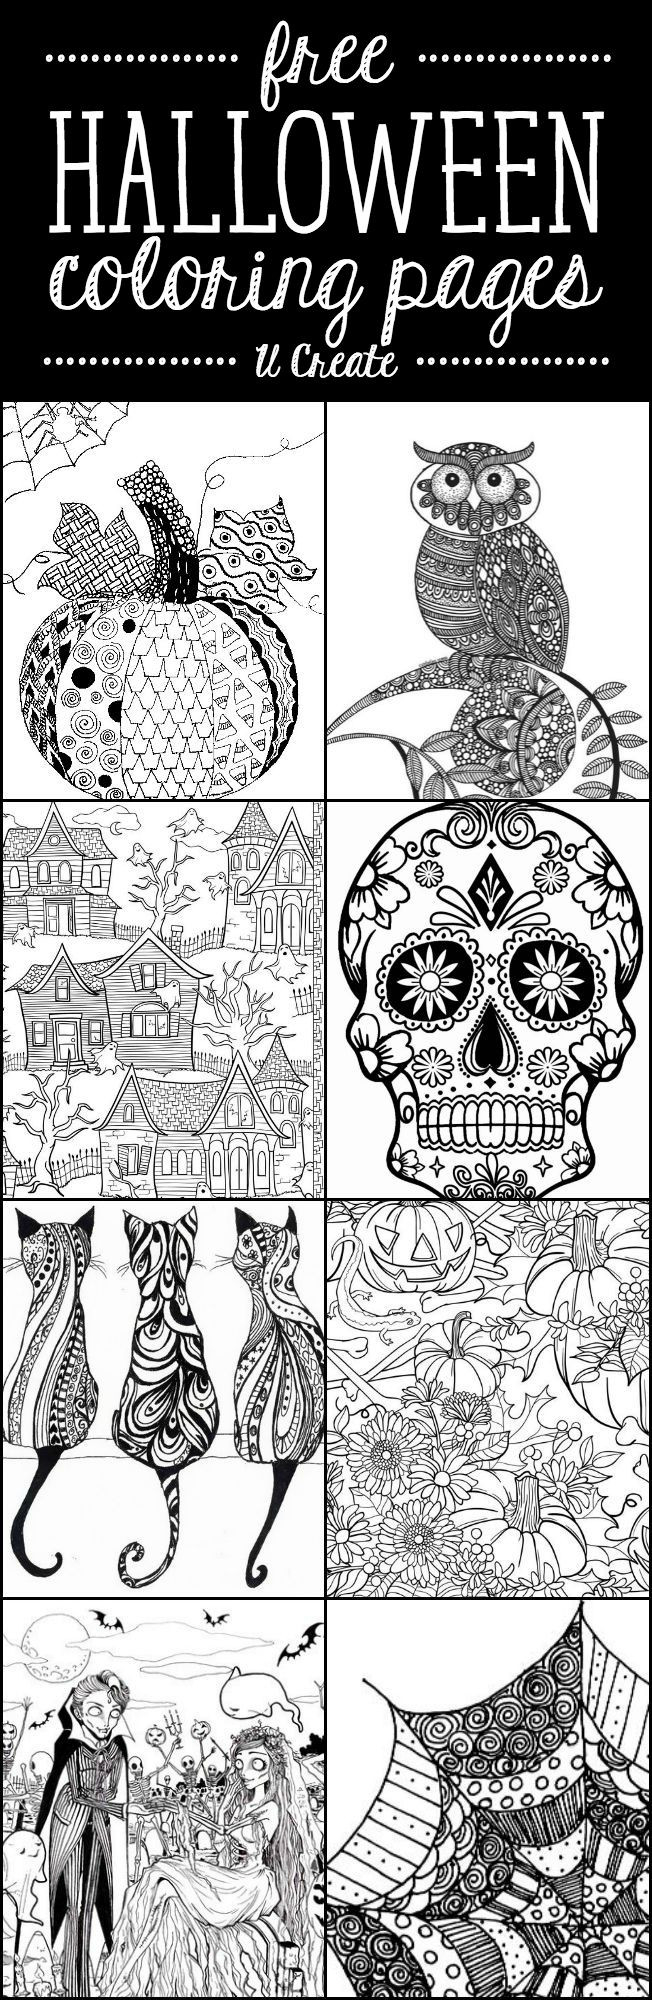 Word Coloring Page Generator Word Coloring Page Generator Inspirational People Coloring Pages Mr